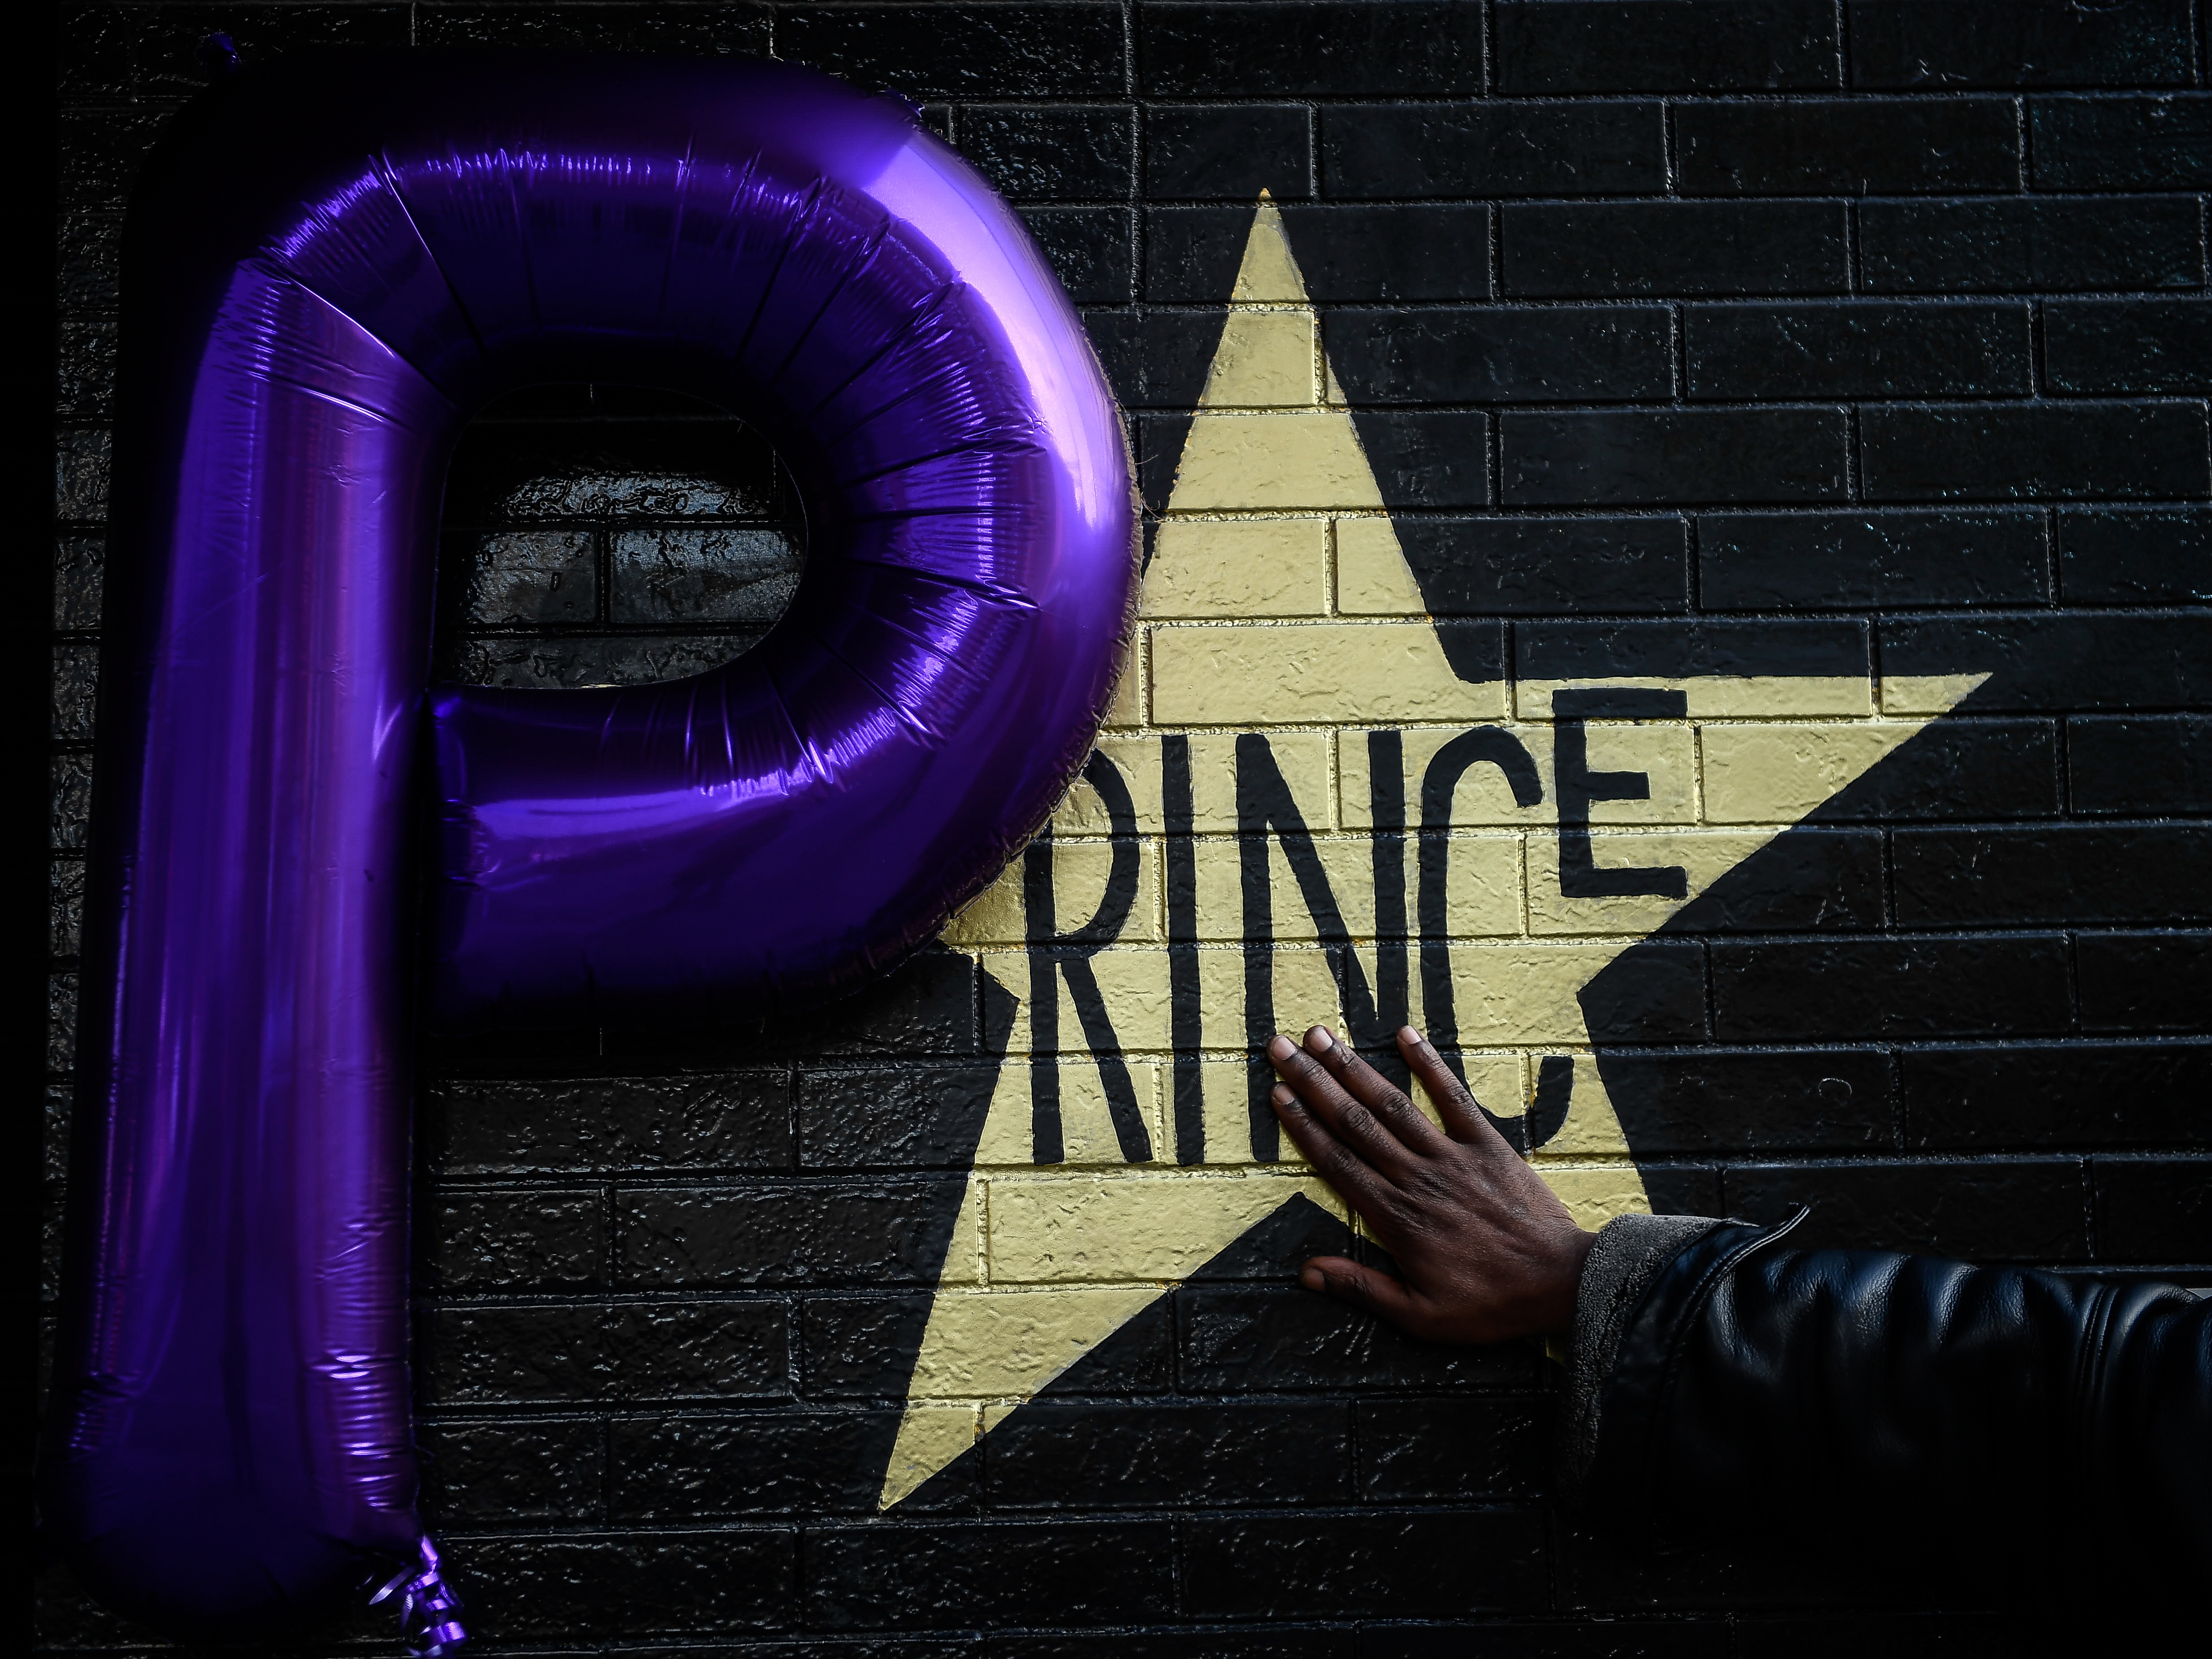 Prince Star on the side of First Avenue